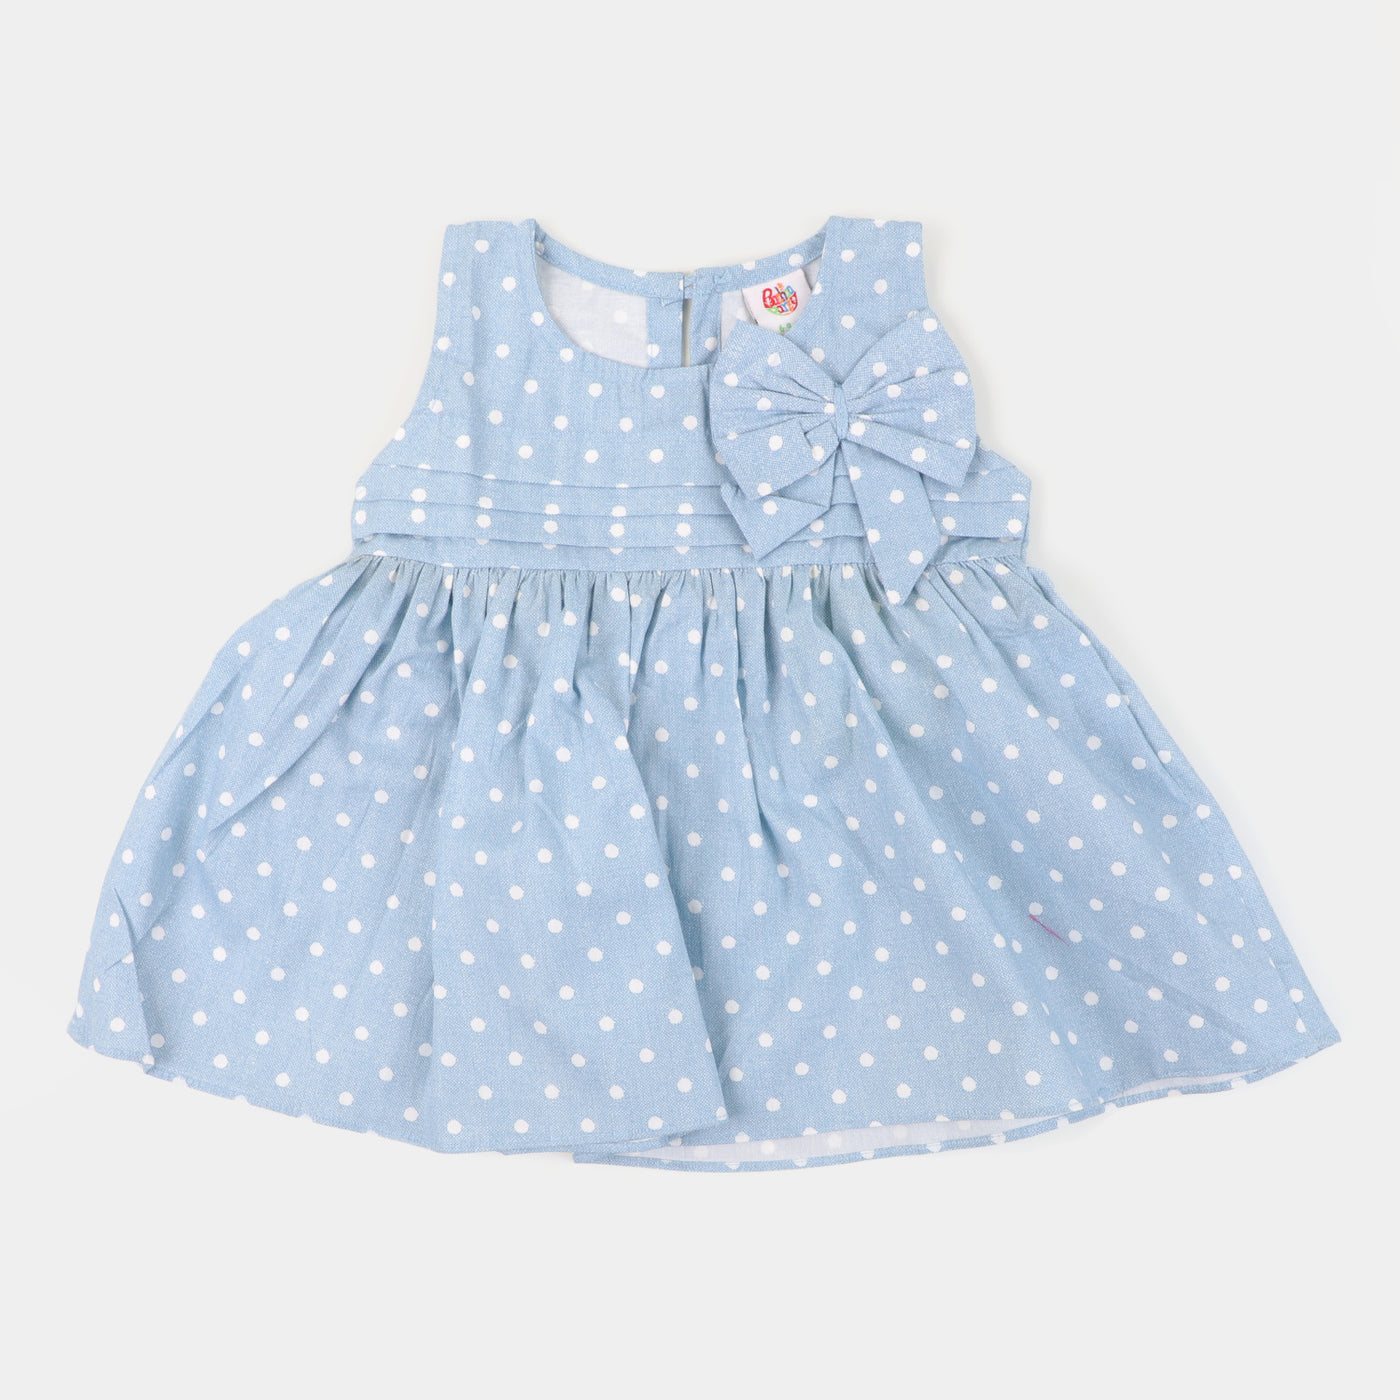 Infant Girls Cotton Casual Frock White Dots